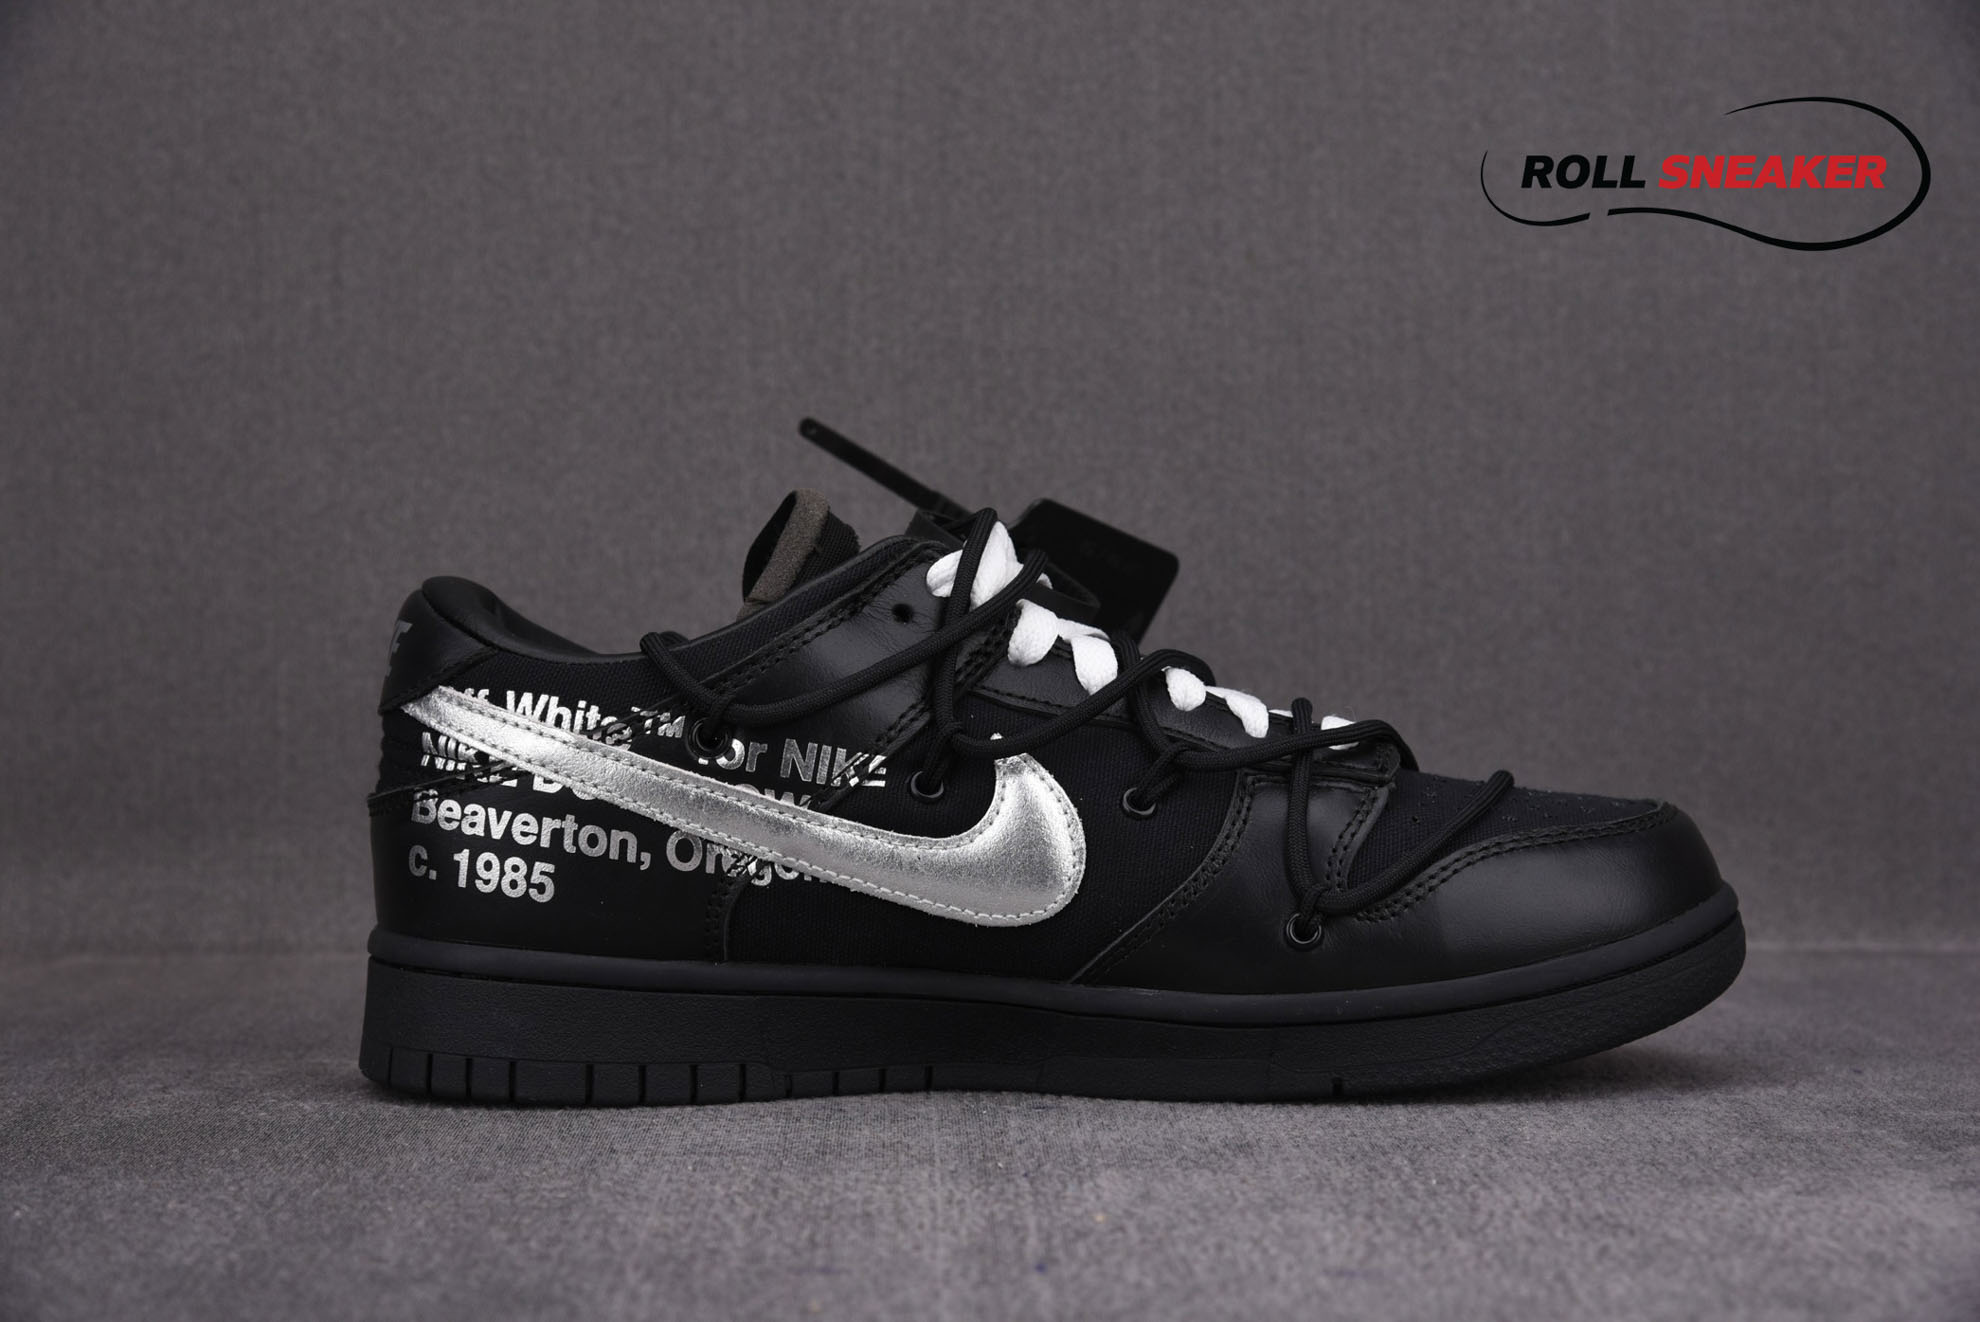 Nike Off-White x Dunk Low ‘Lot 50 Of 50’
